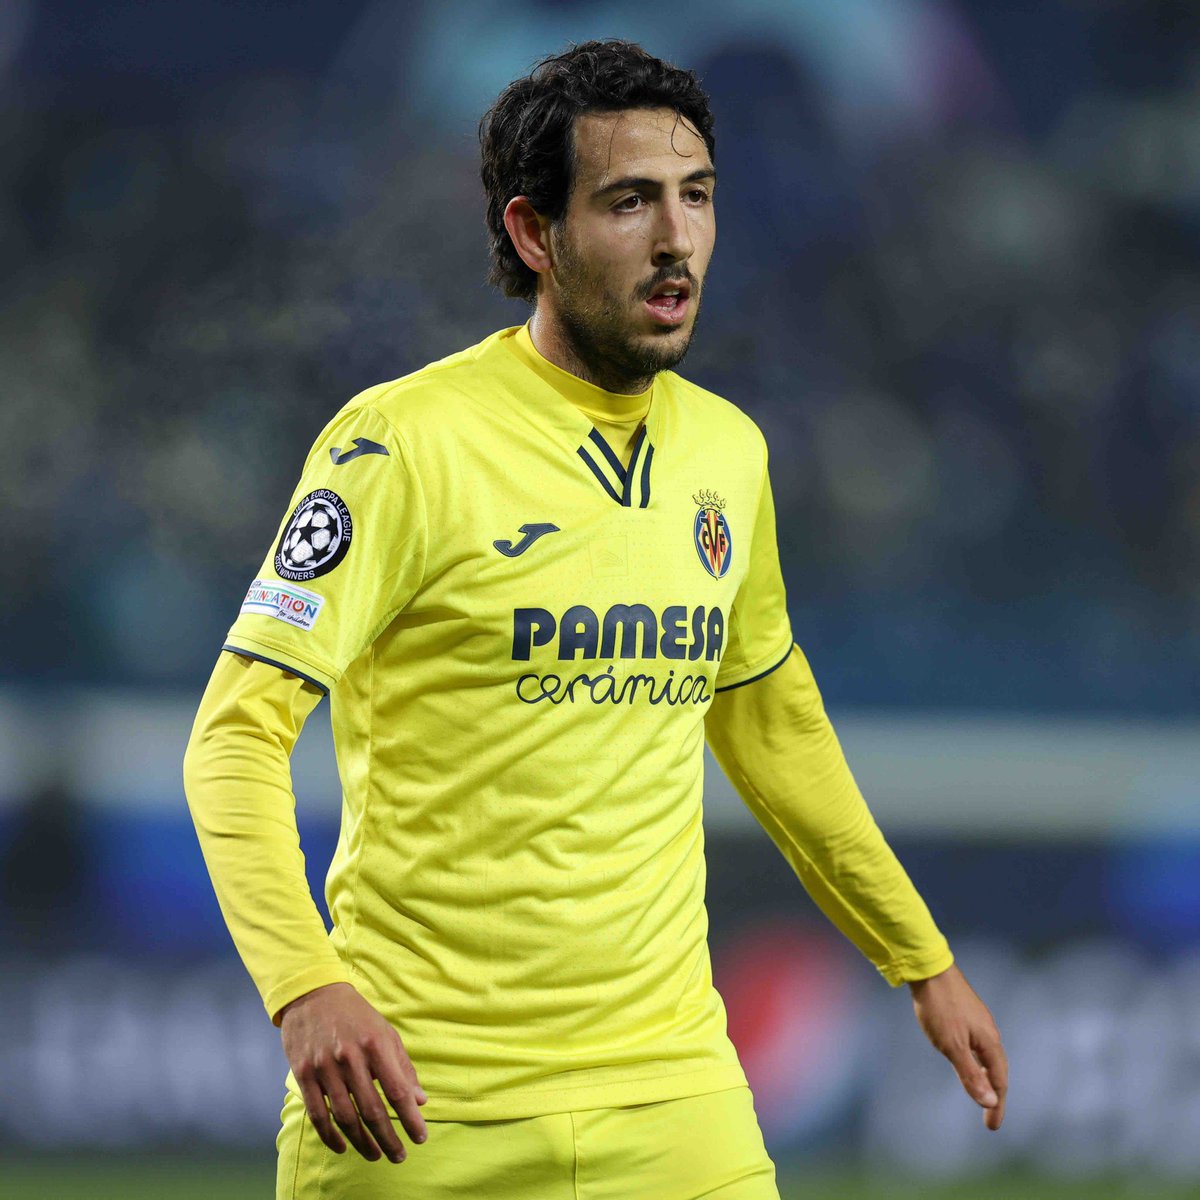 Seen some culés talking down on Dani Parejo. 

Ignore the fact that he’s like 90 years old for a minute; that man is a BALLER. 

His technical skillset is incredible and I don’t expect him to cost so much. 

Not saying he should be a priority, but let’s not disrespect him.